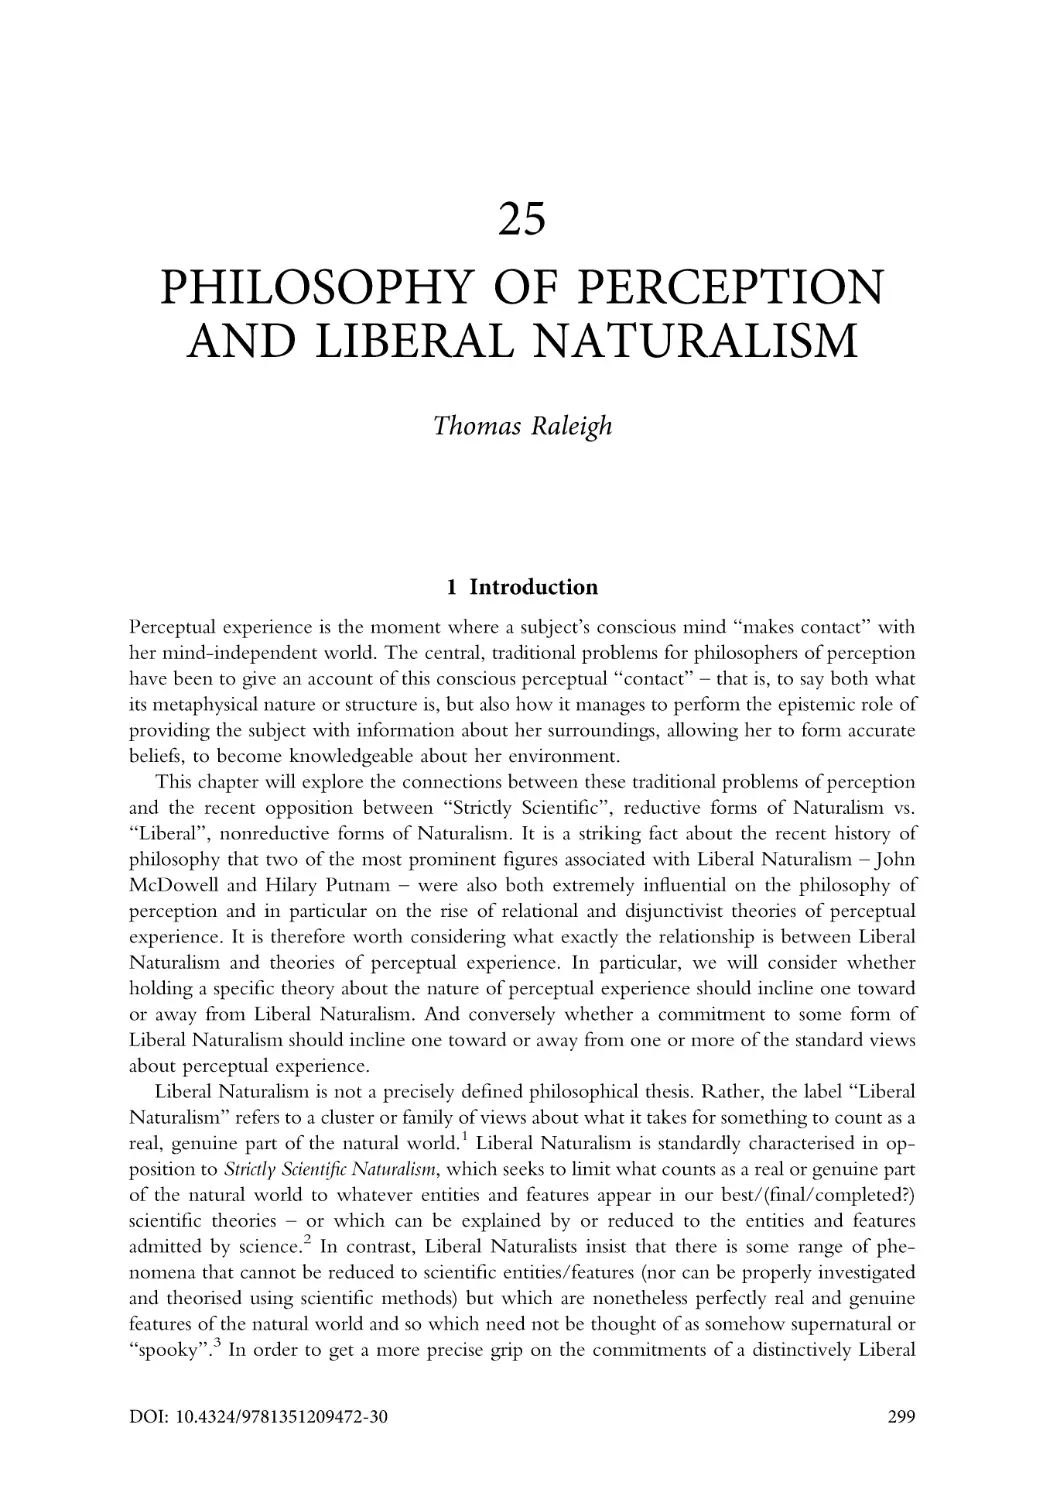 25. Philosophy of perception and liberal naturalism
1. Introduction